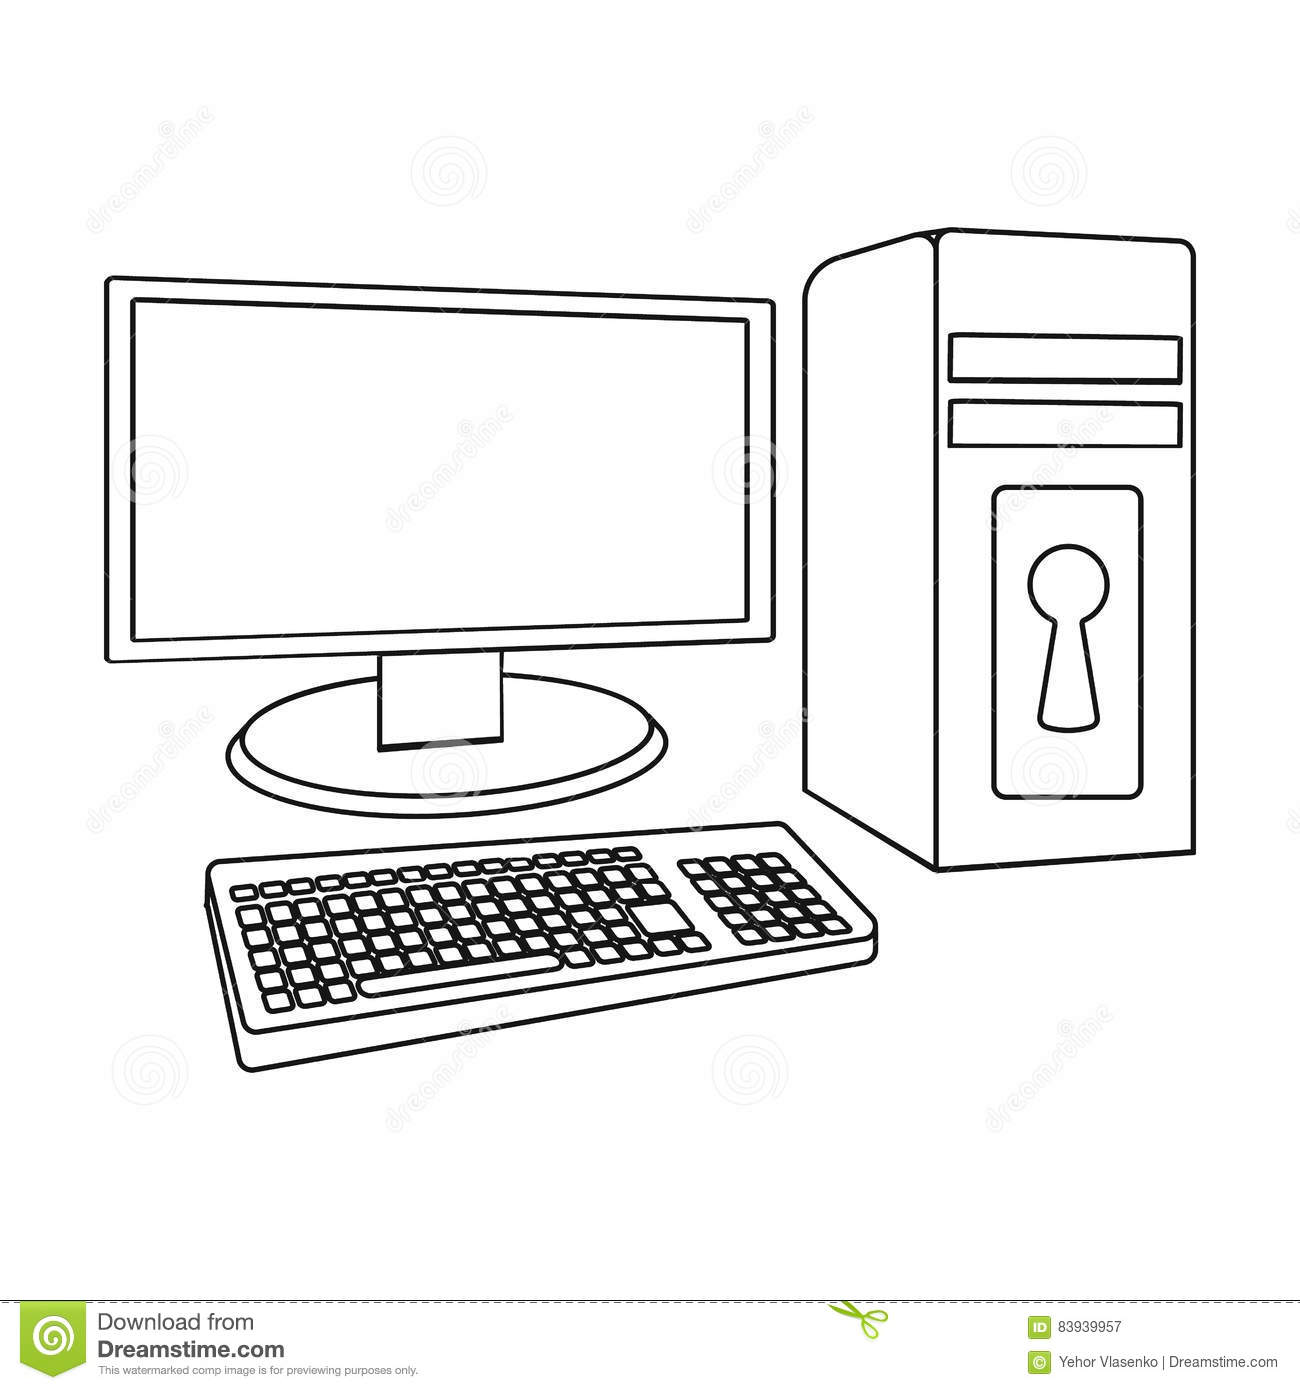 Computer outline clipart.